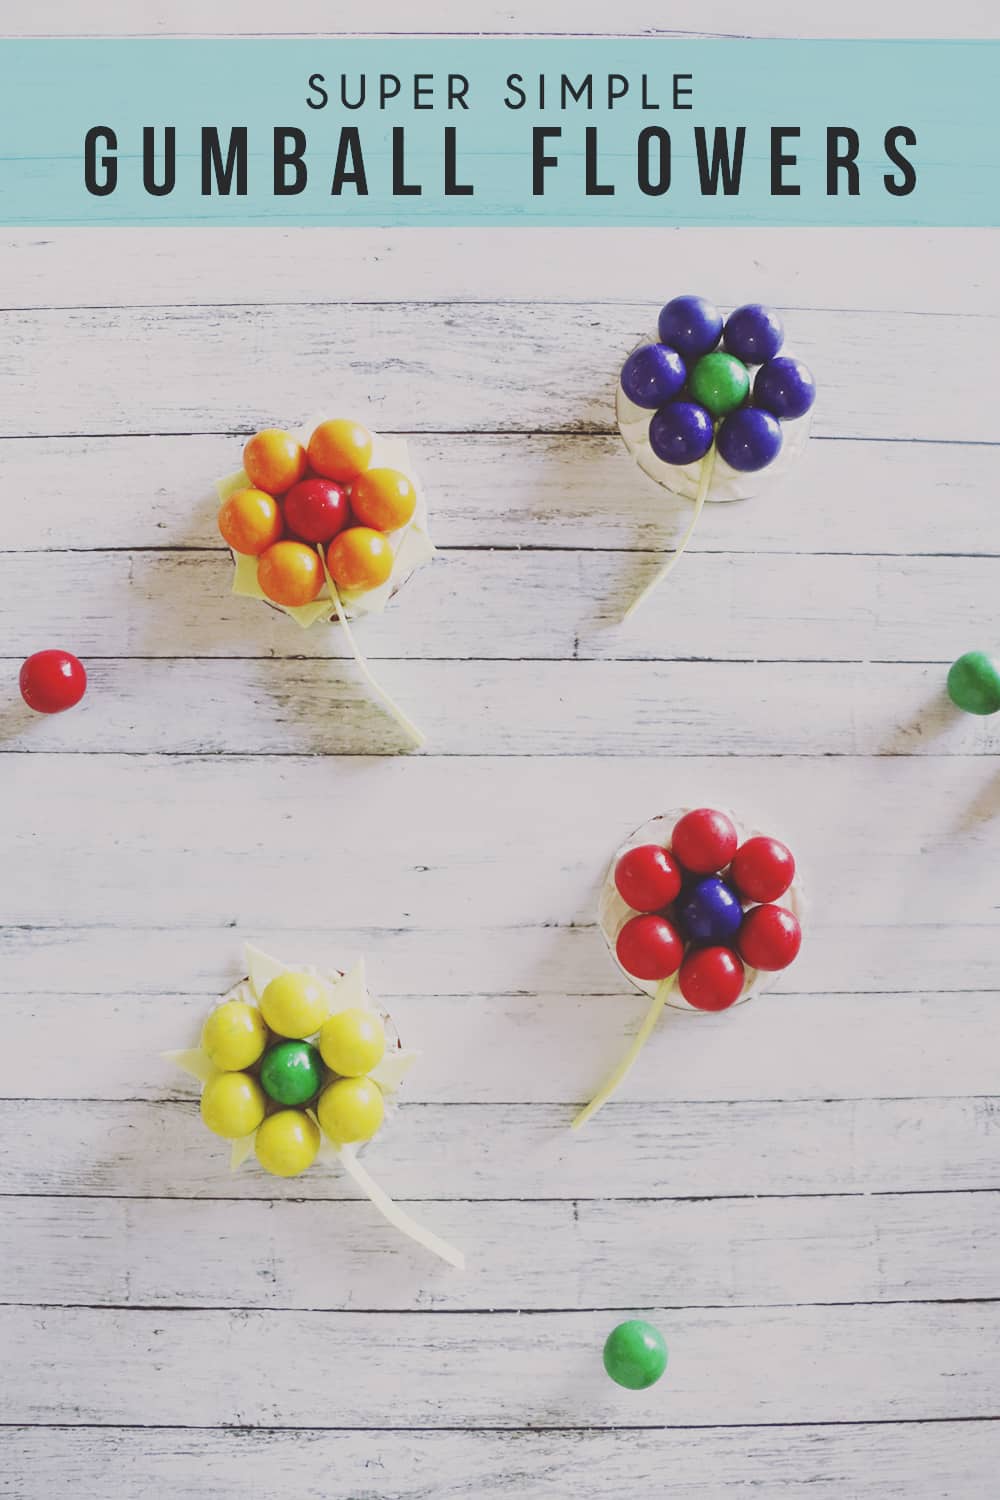 These super simple gumball flowers make the perfect Spring decor for your table! With their bright colors and sweet flavors, everyone will love them!